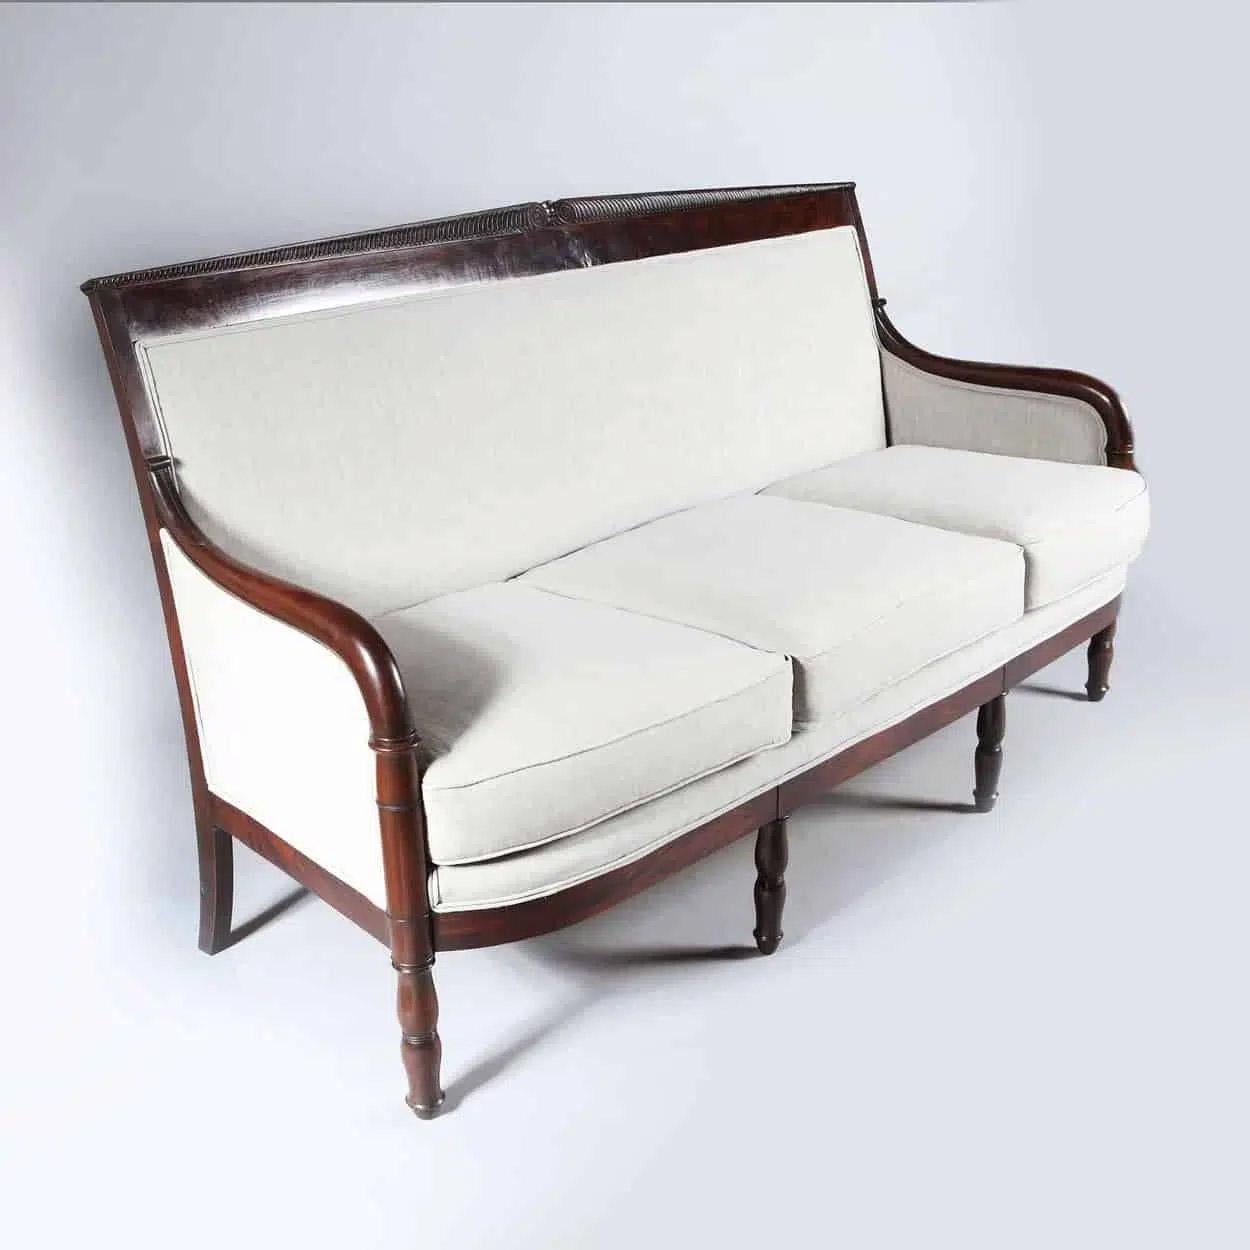 French Empire Mahogany Settee, Early 19th Century For Sale 1